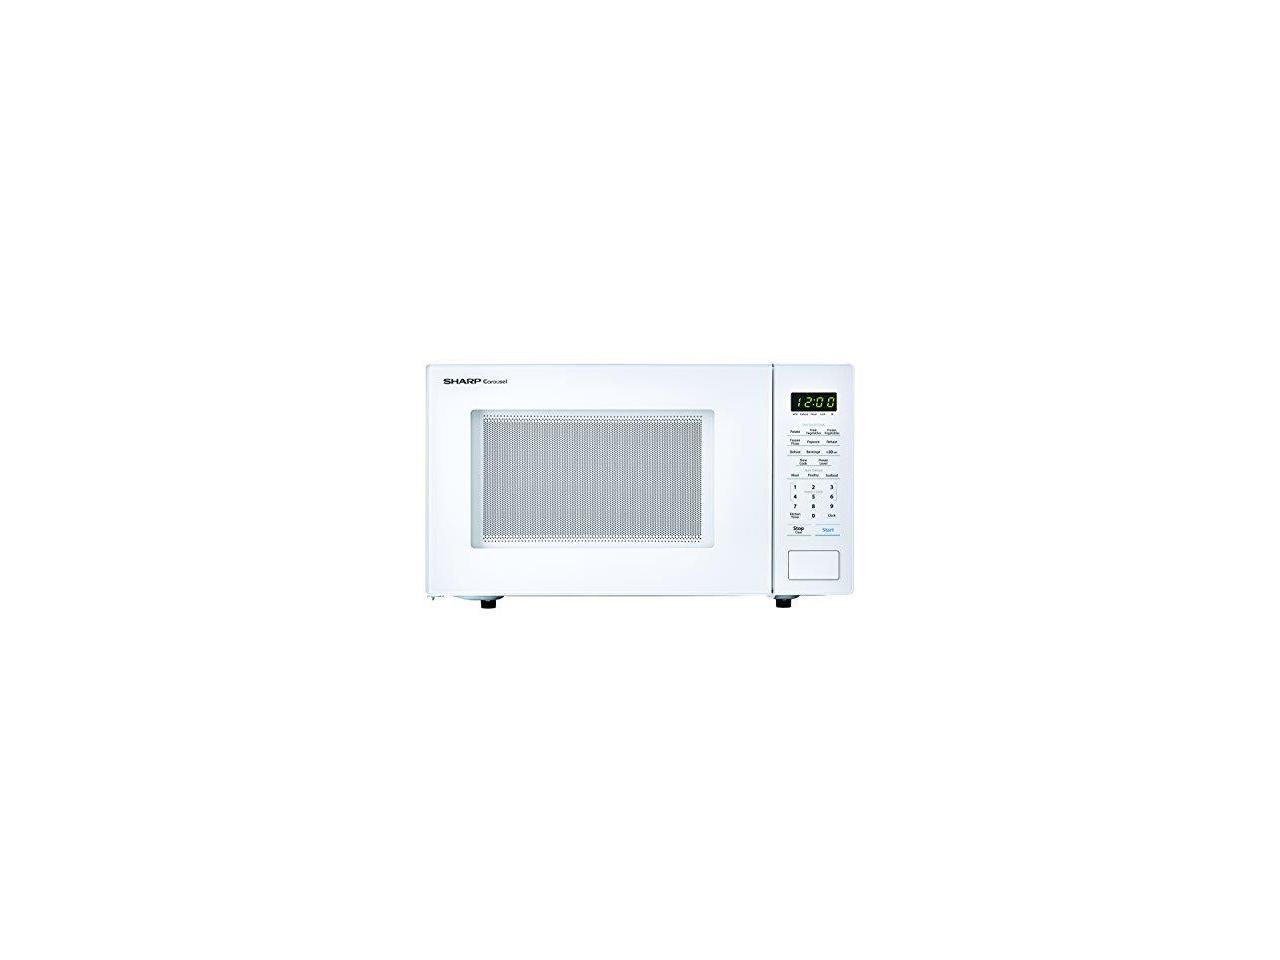 ISTA 6 Packaging 1000 Watts SHARP ZSMC1131CW White Carousel 1.1 Cu Ft 1000W Countertop Microwave Oven Cubic Foot 